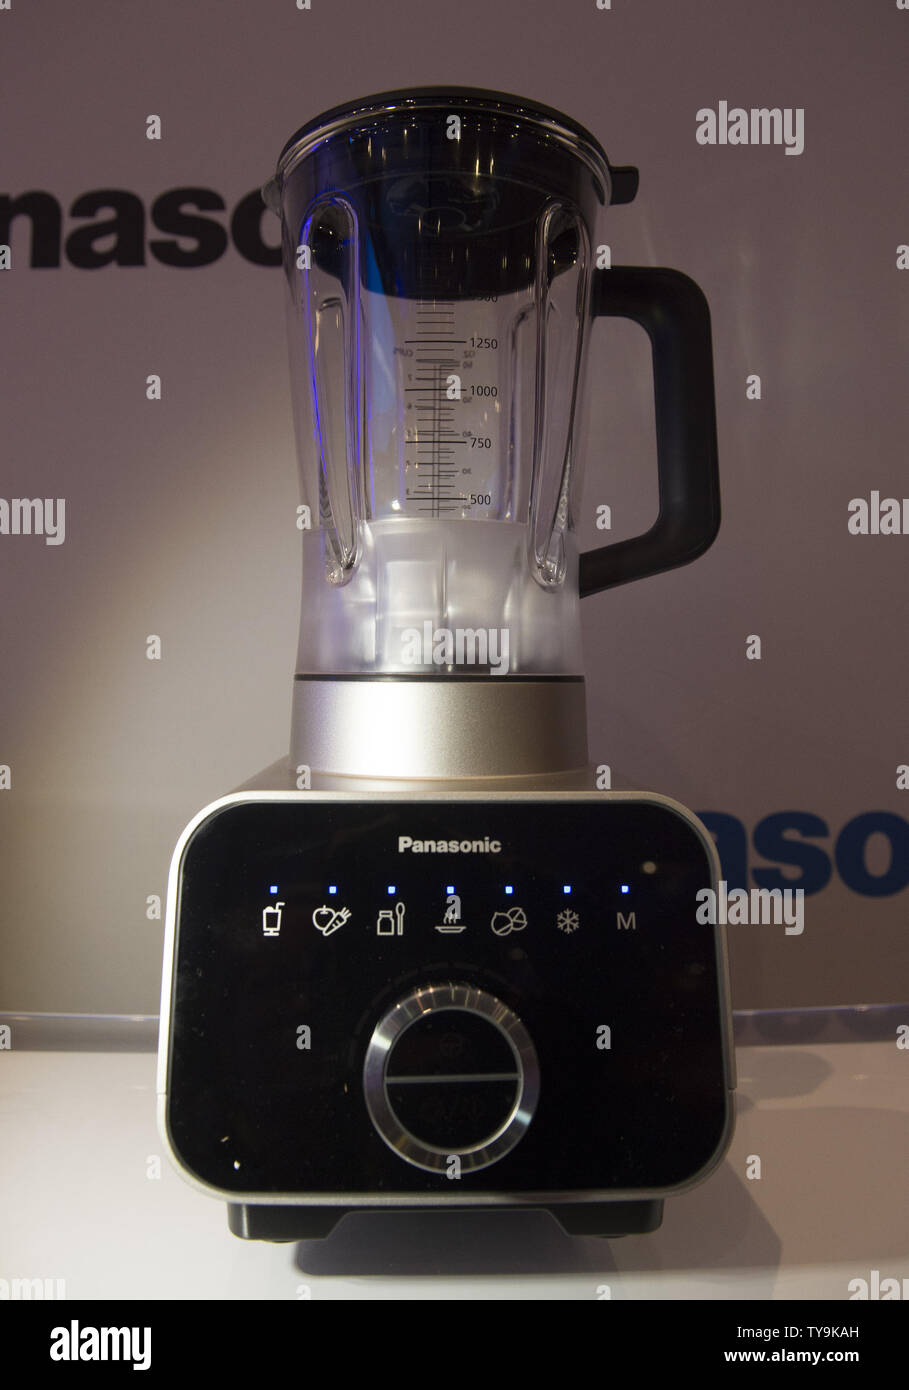 The Panasonic High-Powered blender is displayed ahead of the 2016  International CES, a trade show of consumer electronics, in Las Vegas,  Nevada, January 5, 2016. Photo by Molly Riley/UPI Stock Photo - Alamy